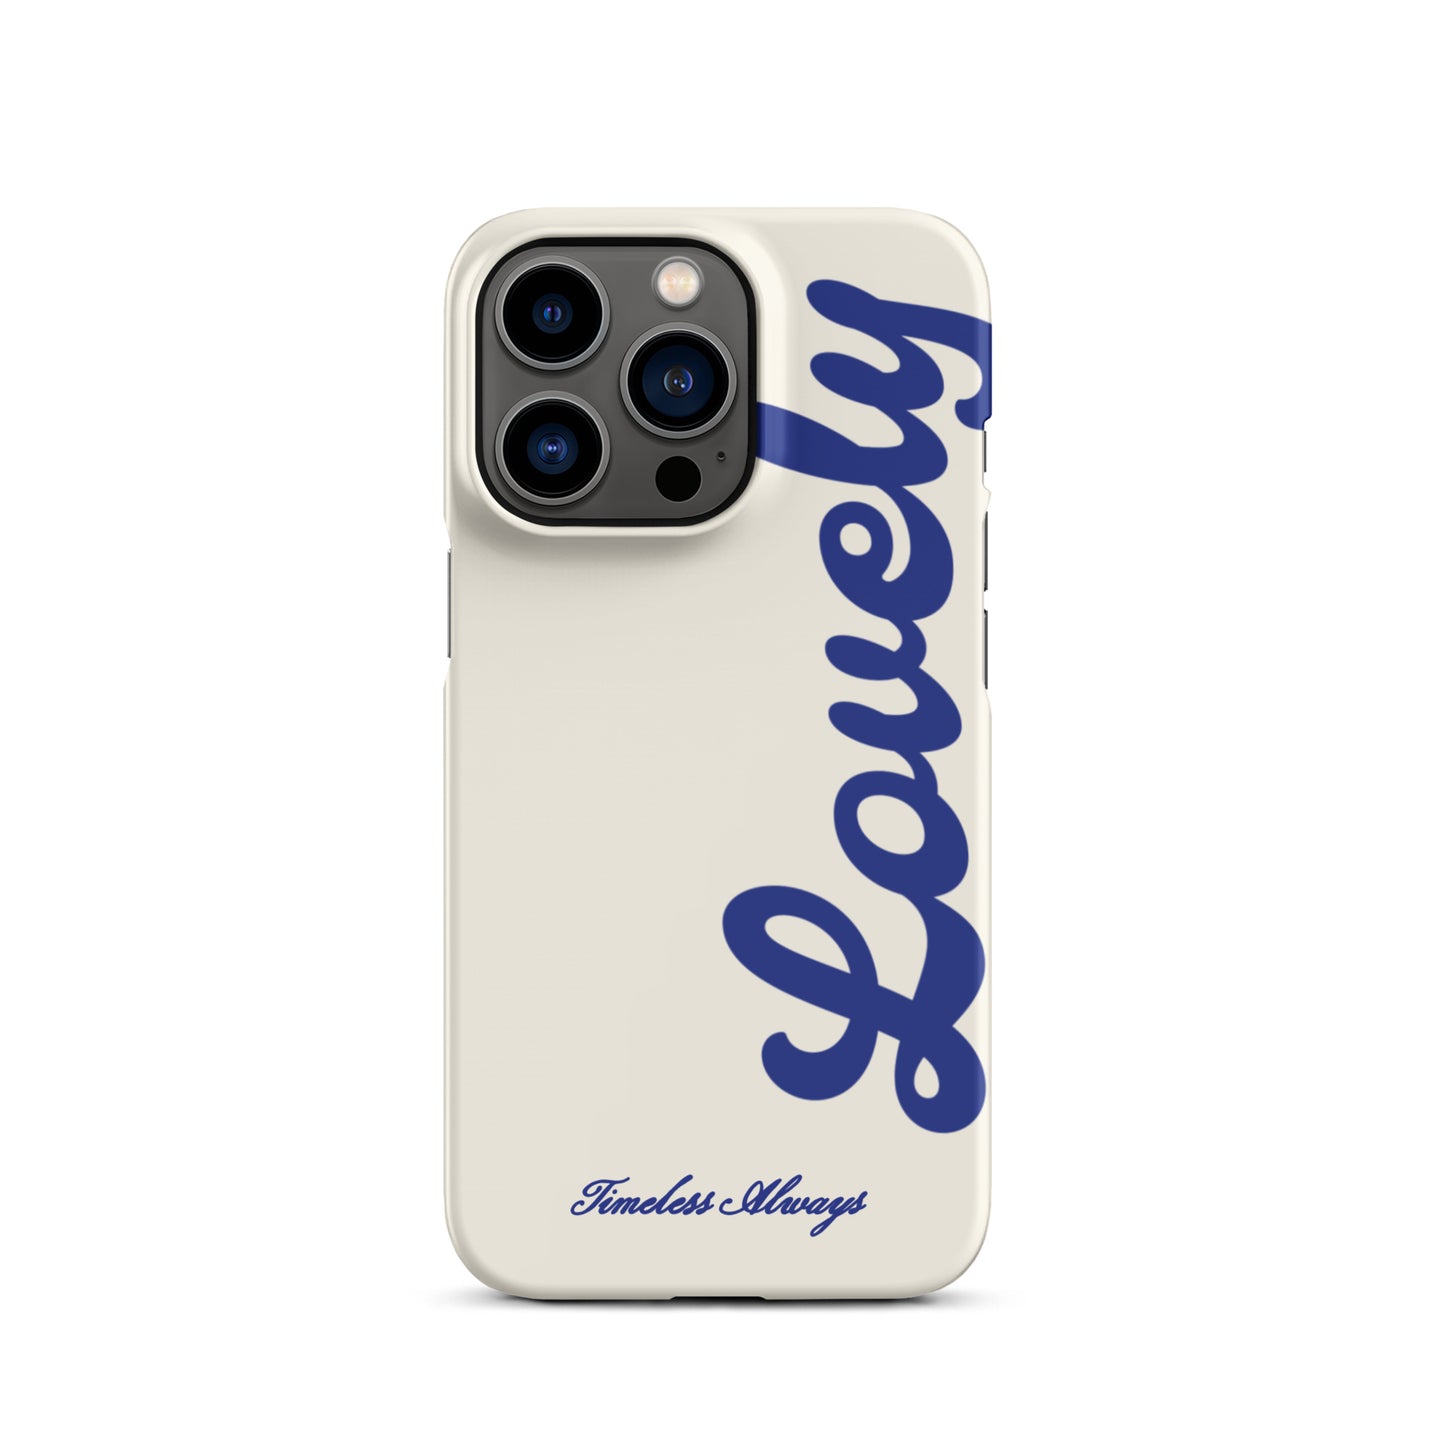 LOVELY iPhone® case